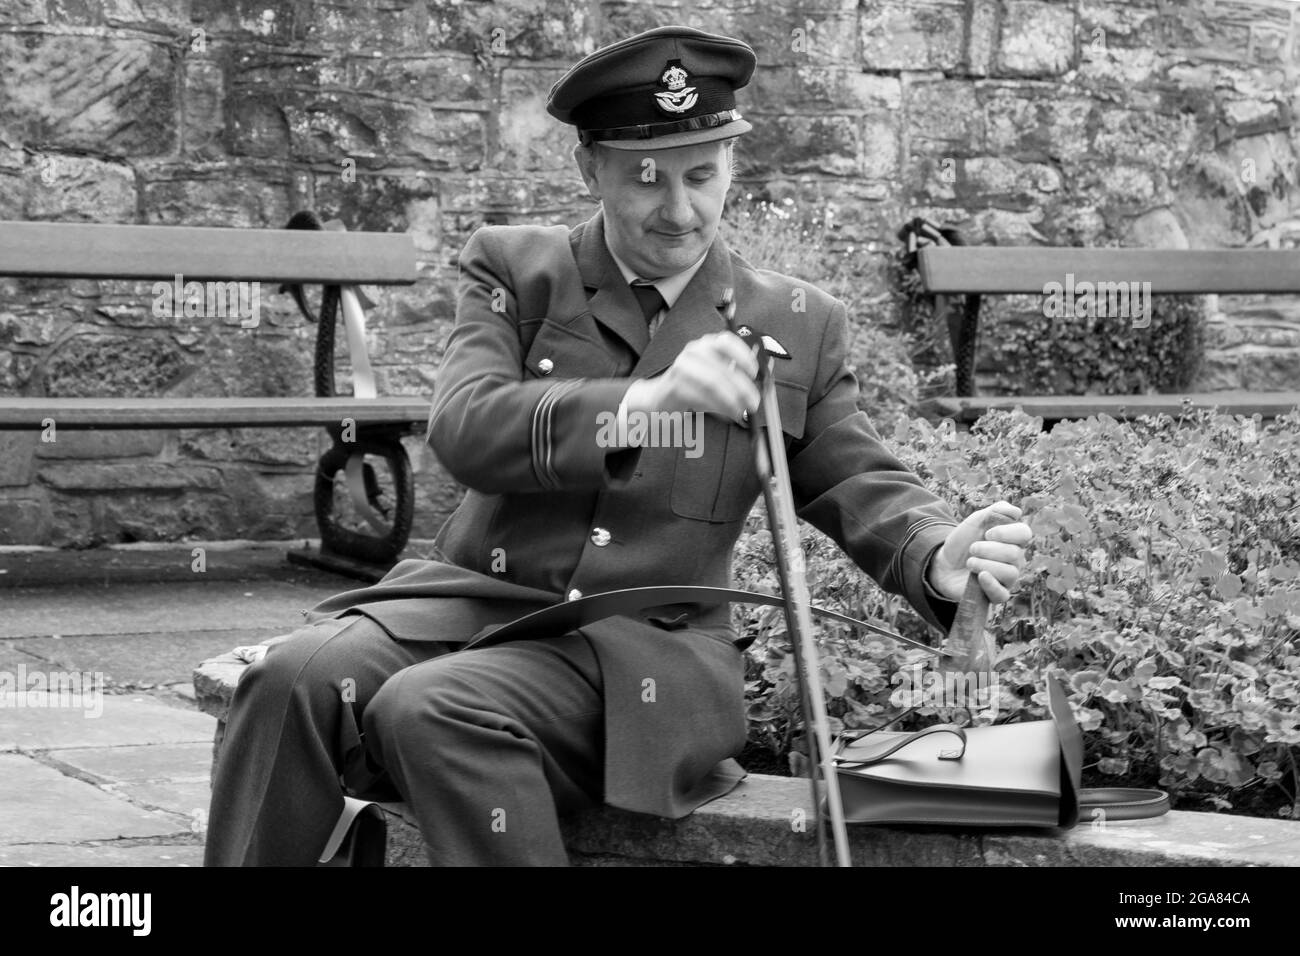 A man wearing a British Royal Air Force uniform playing a musical saw with a bow during a1940's weekend, Nidderdale, England, UK. Stock Photo